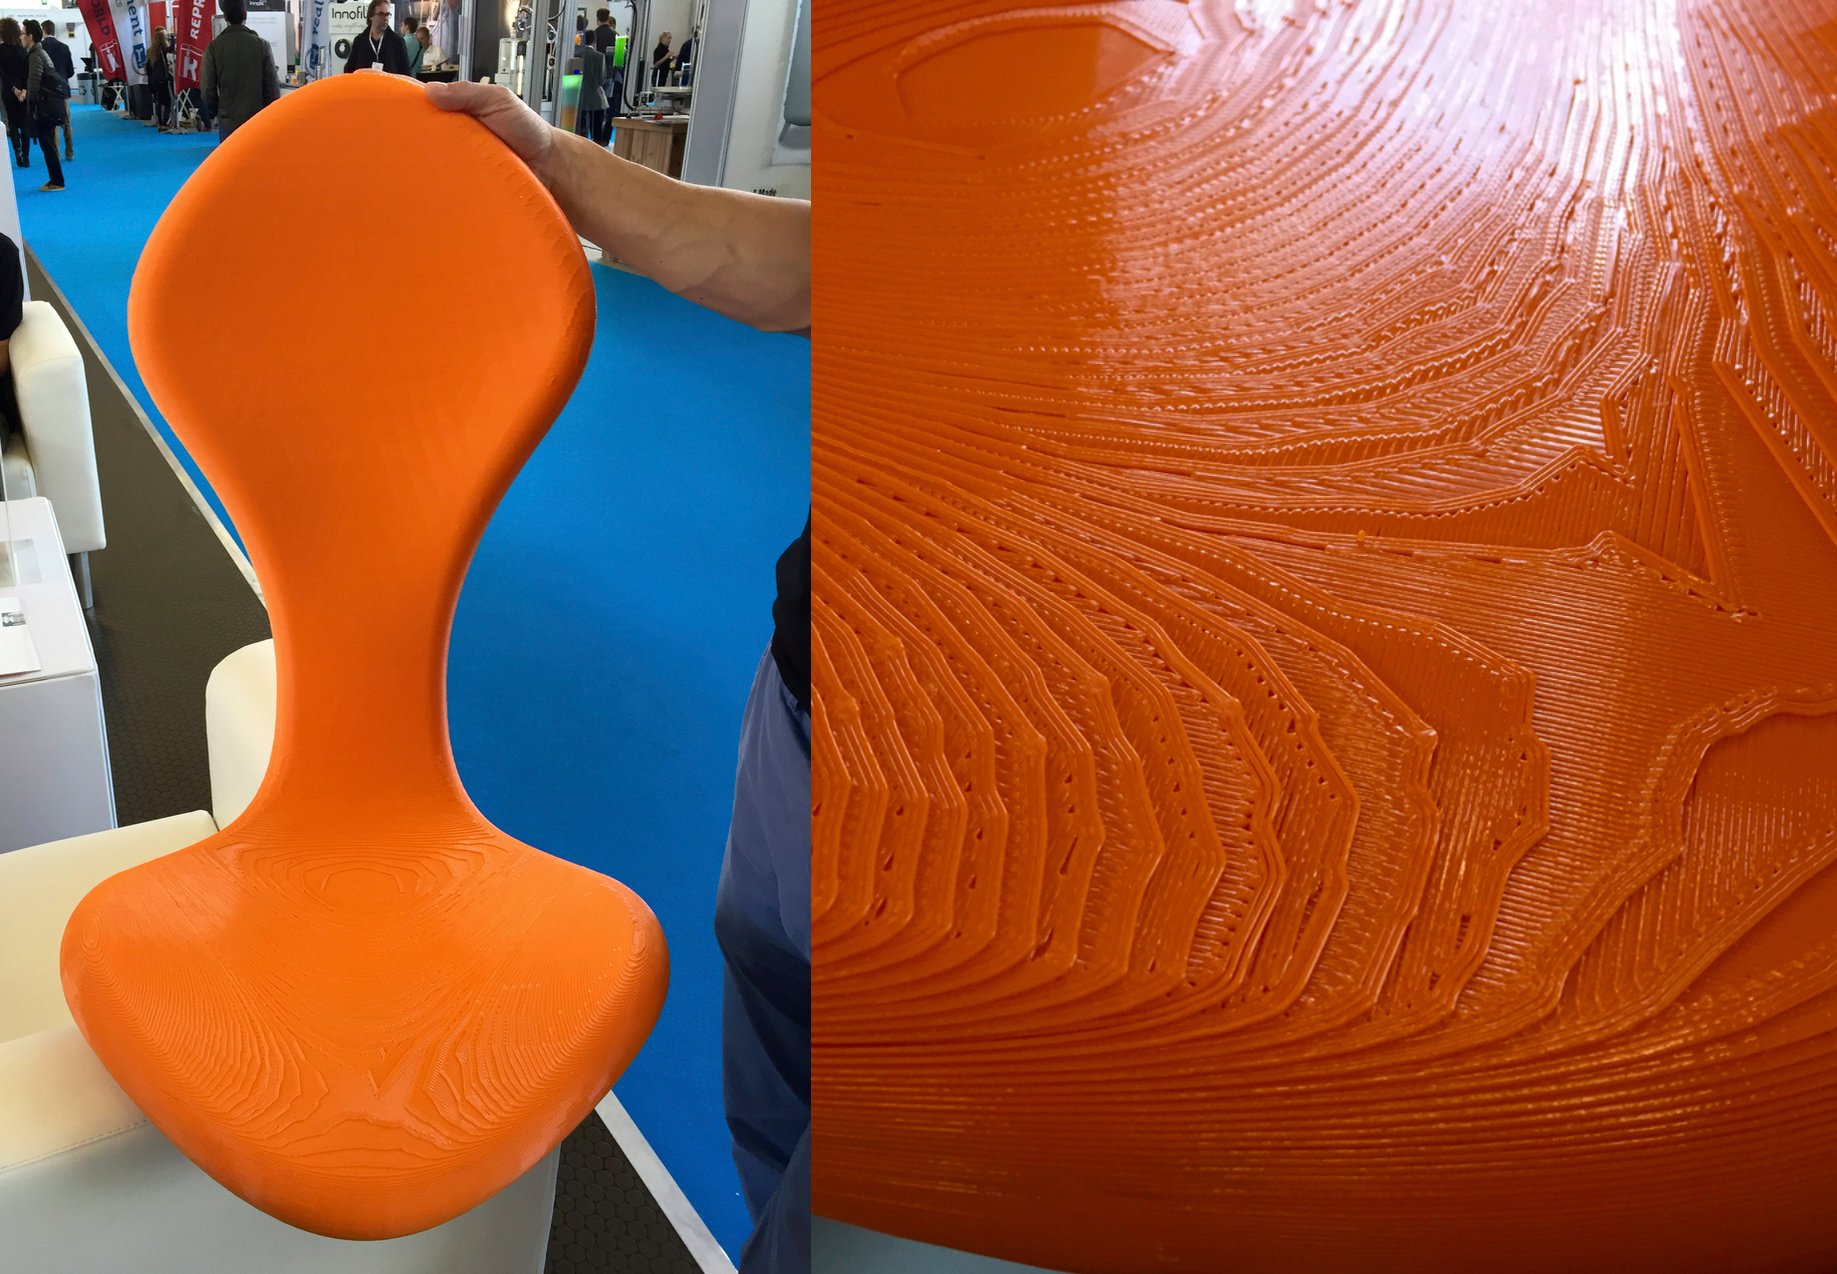  BigRep One 3D printed this cool chair, but if you look close, the detail shows the layers easily 